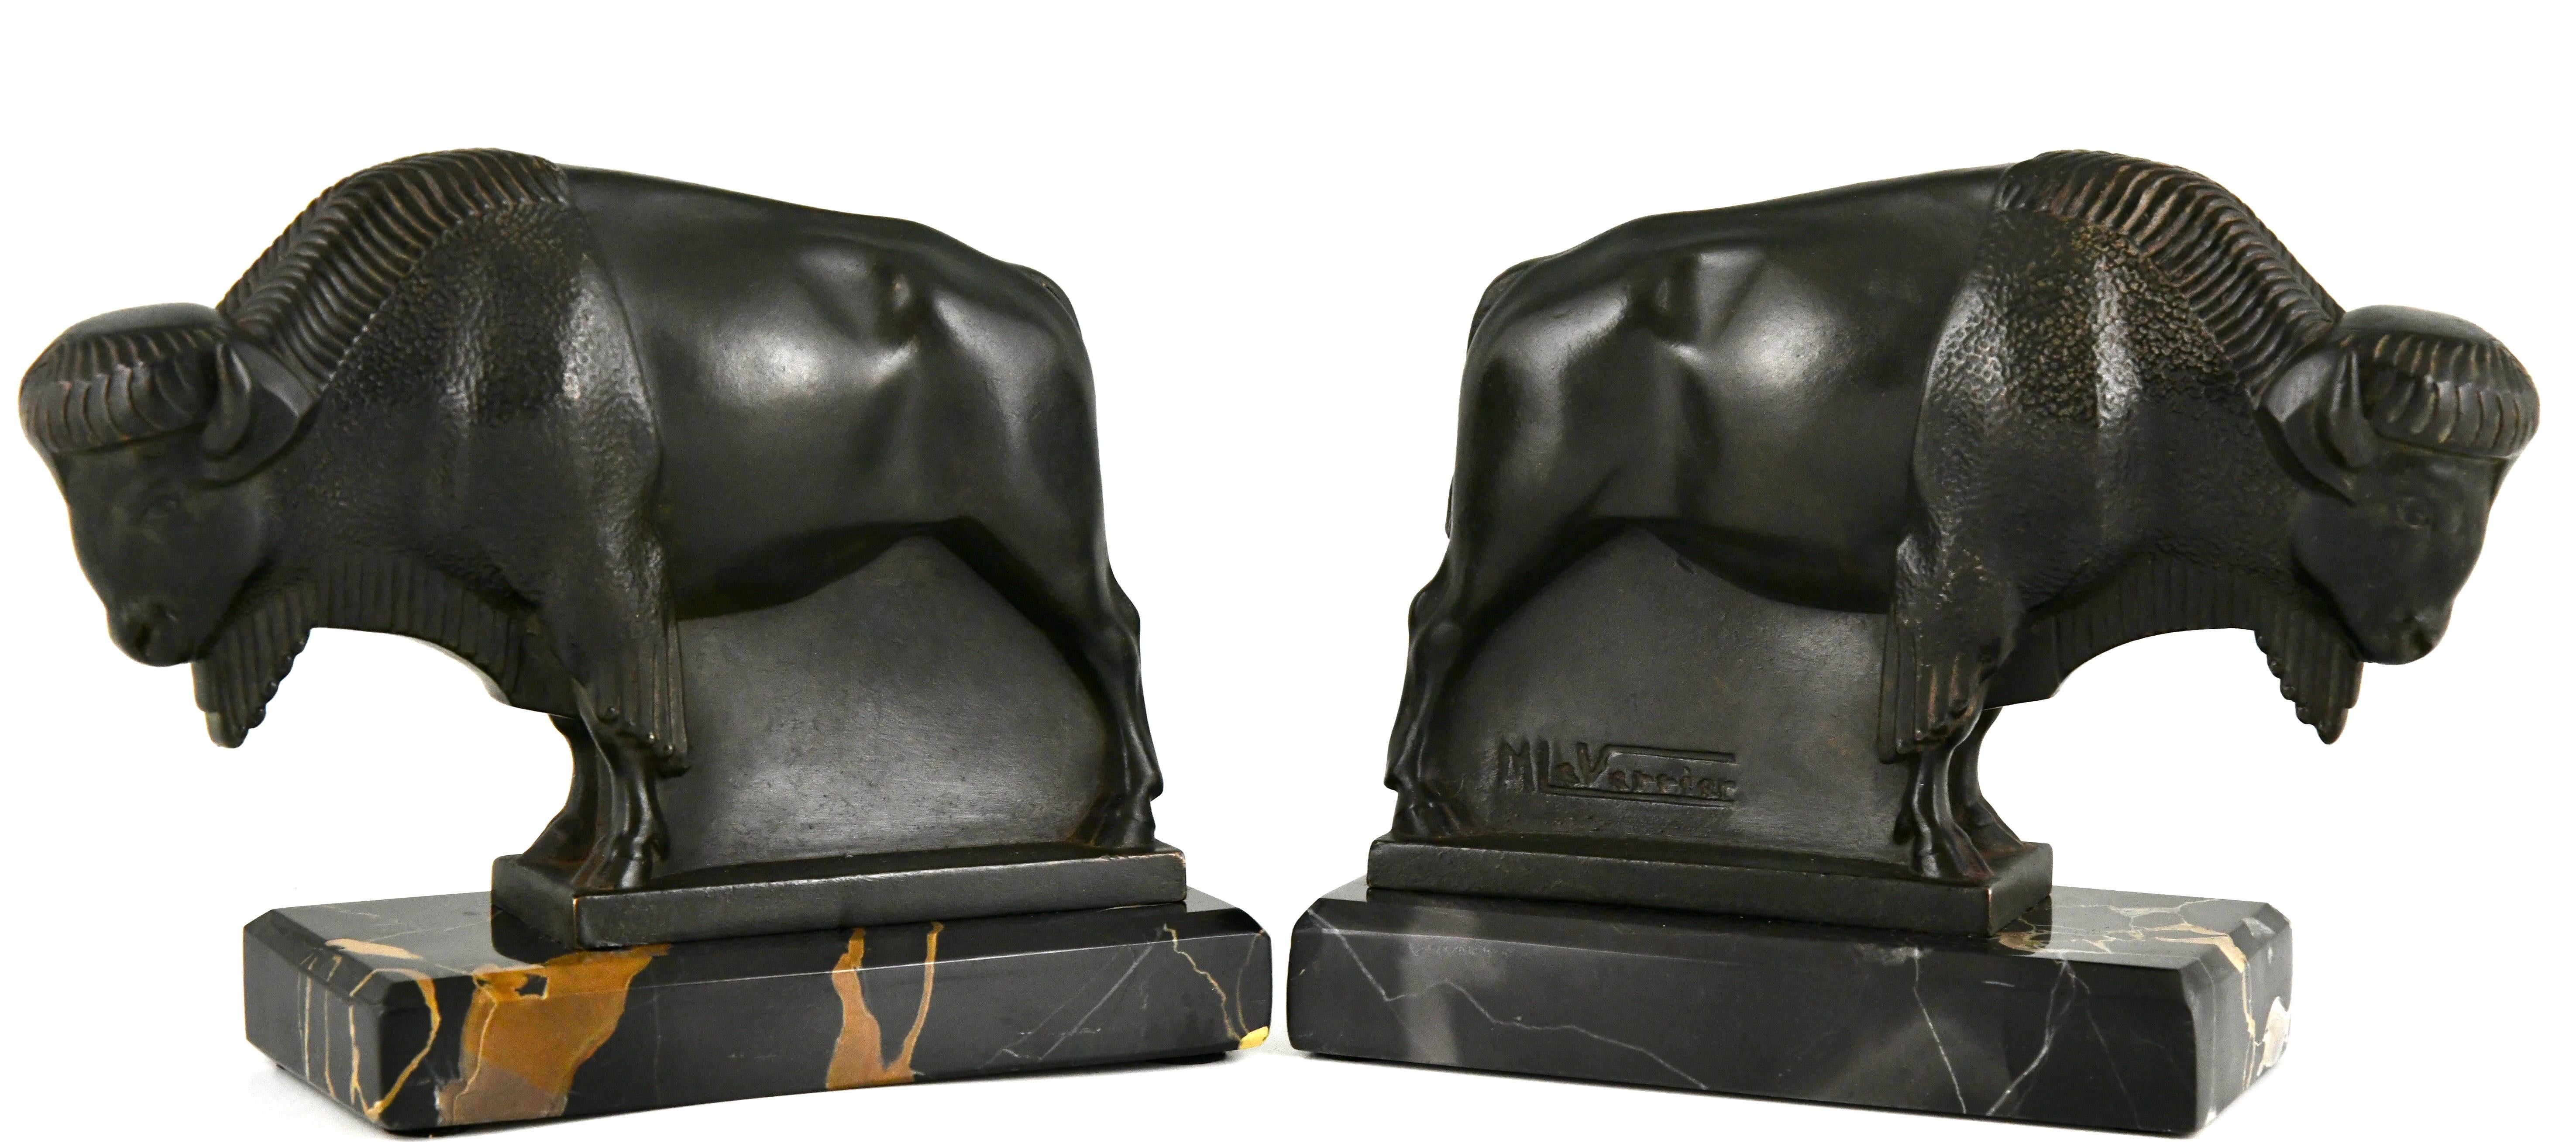 Patinated Art Deco bison bookends by Max Le Verrier original 1930 on Portor marble base.  For Sale